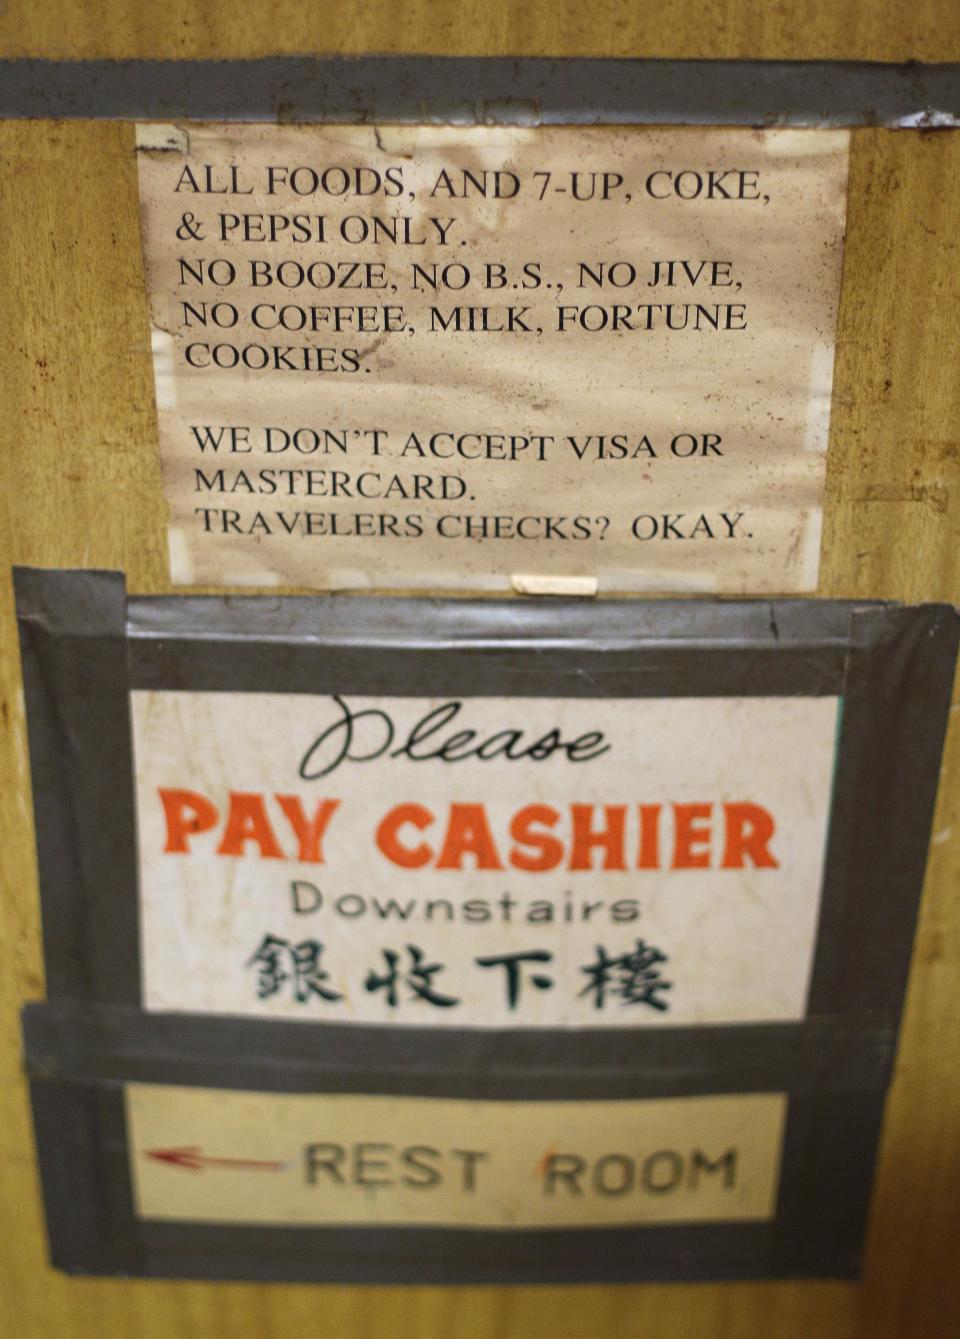 Signs taped to the walls from long ago are shown inside the Sam Wo restaurant in Chinatown in San Francisco, Friday, April 20, 2012. The 100-year-old Chinese restaurant known for having "the world's rudest waiter" is shutting its doors and serving its last customers Friday. (AP Photo/Eric Risberg)